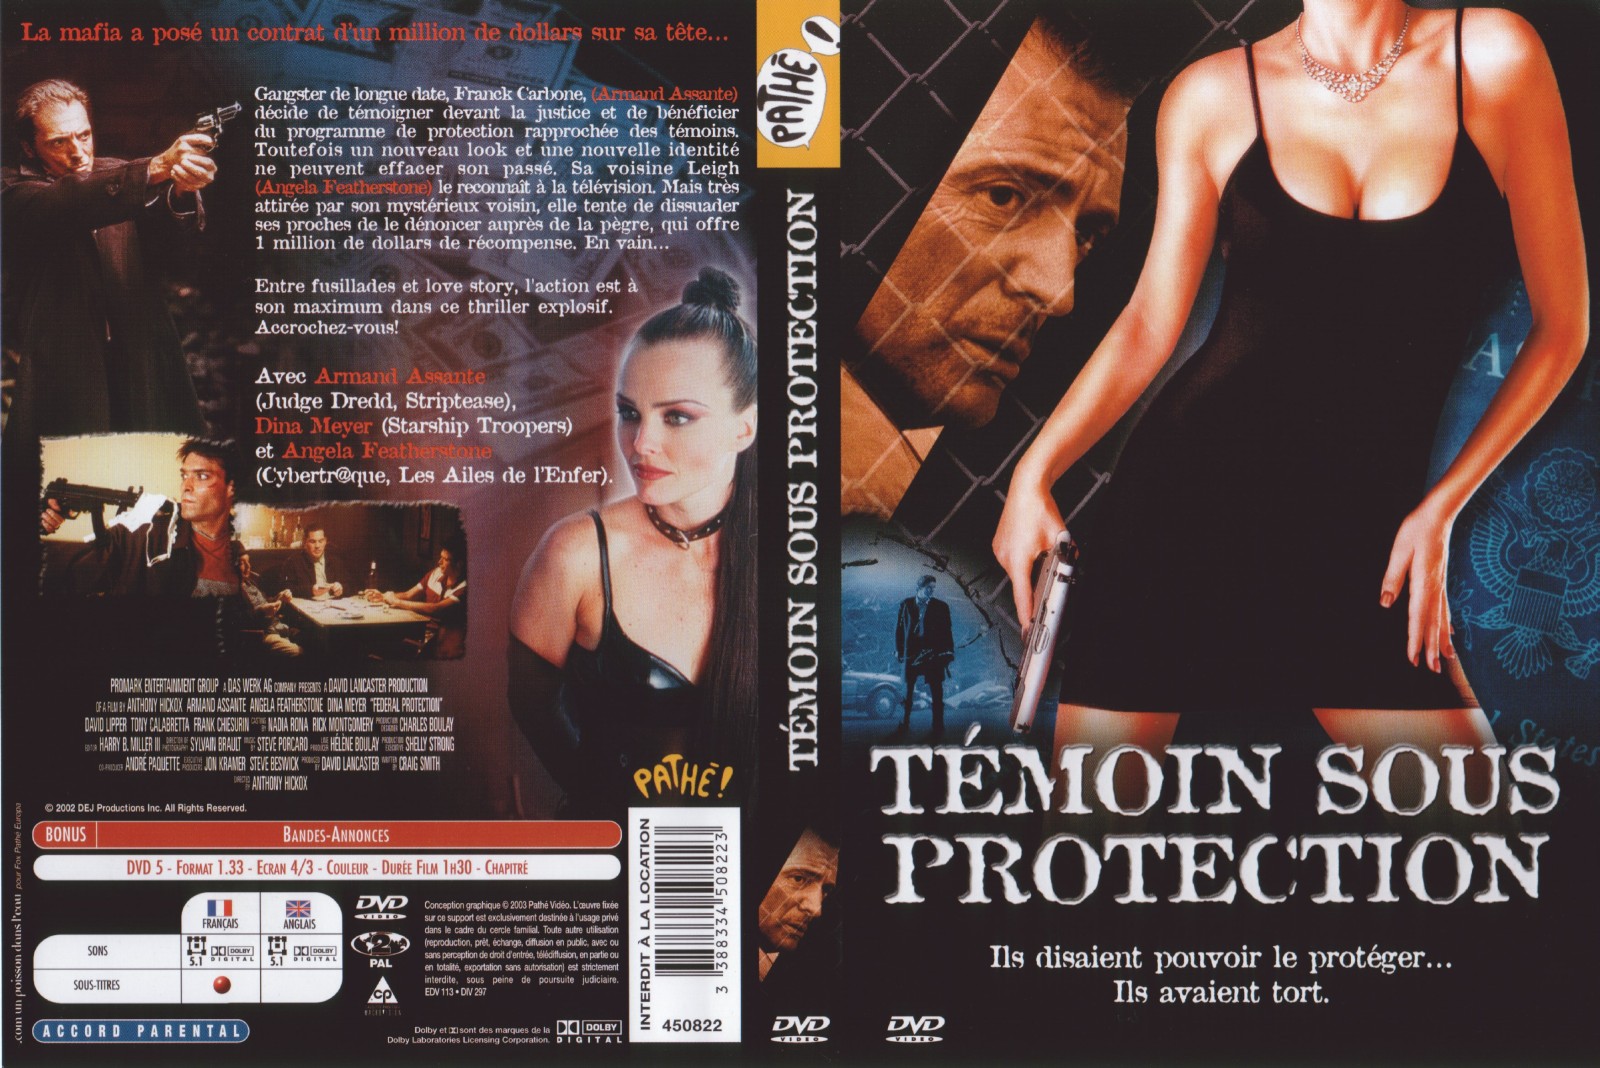 Jaquette DVD Temoin sous protection v2